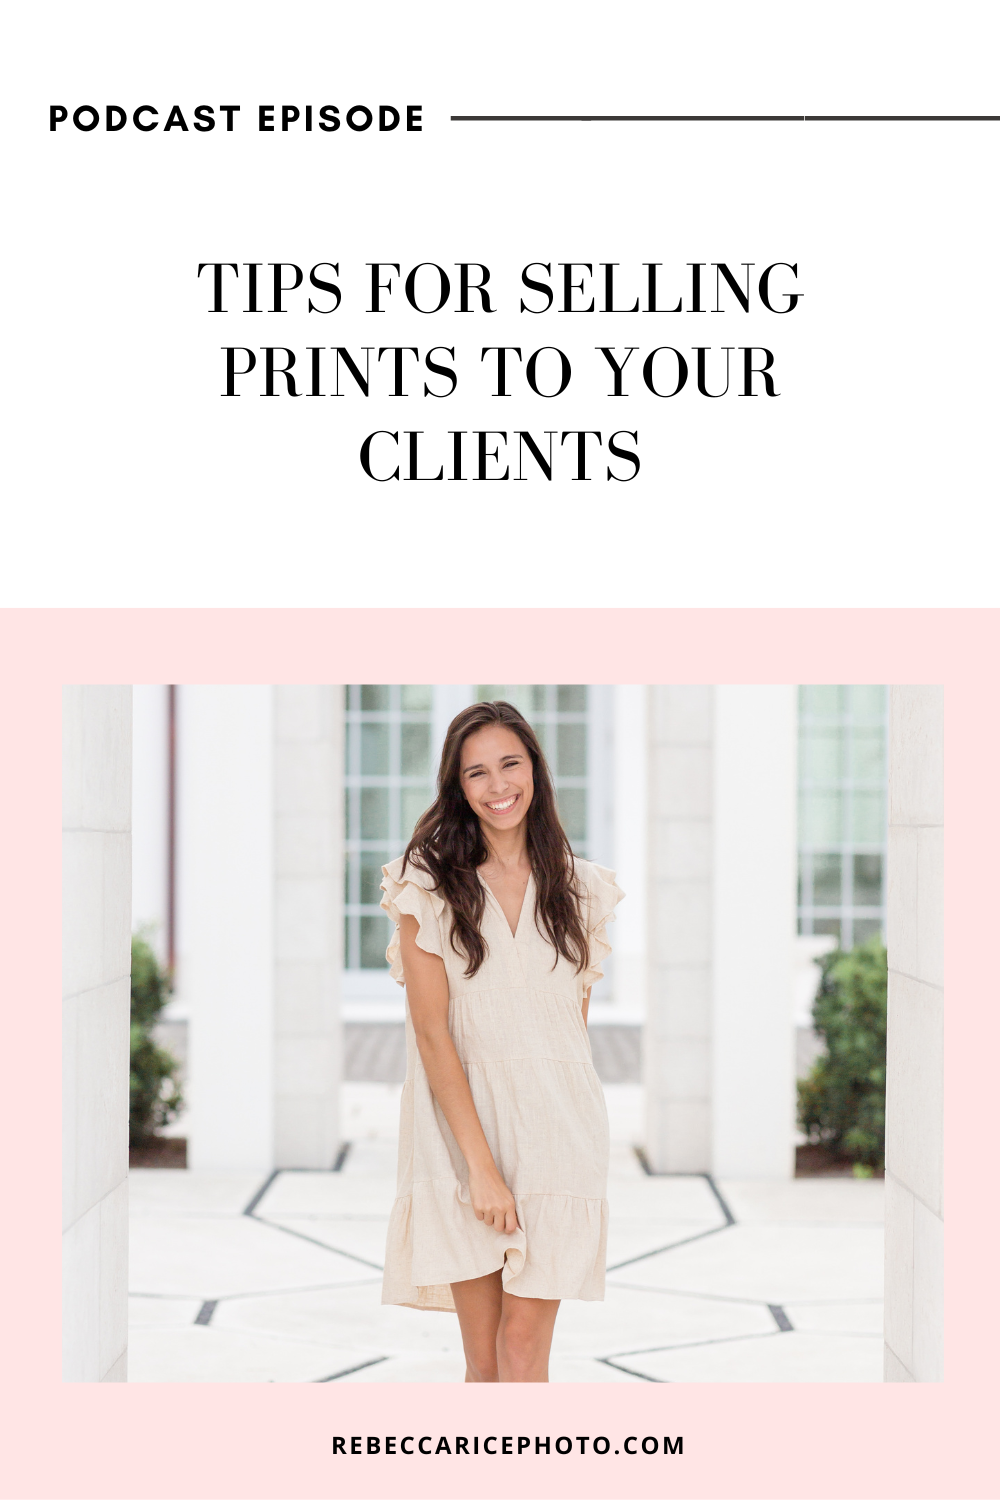 Tips for Selling Prints To Your Clients